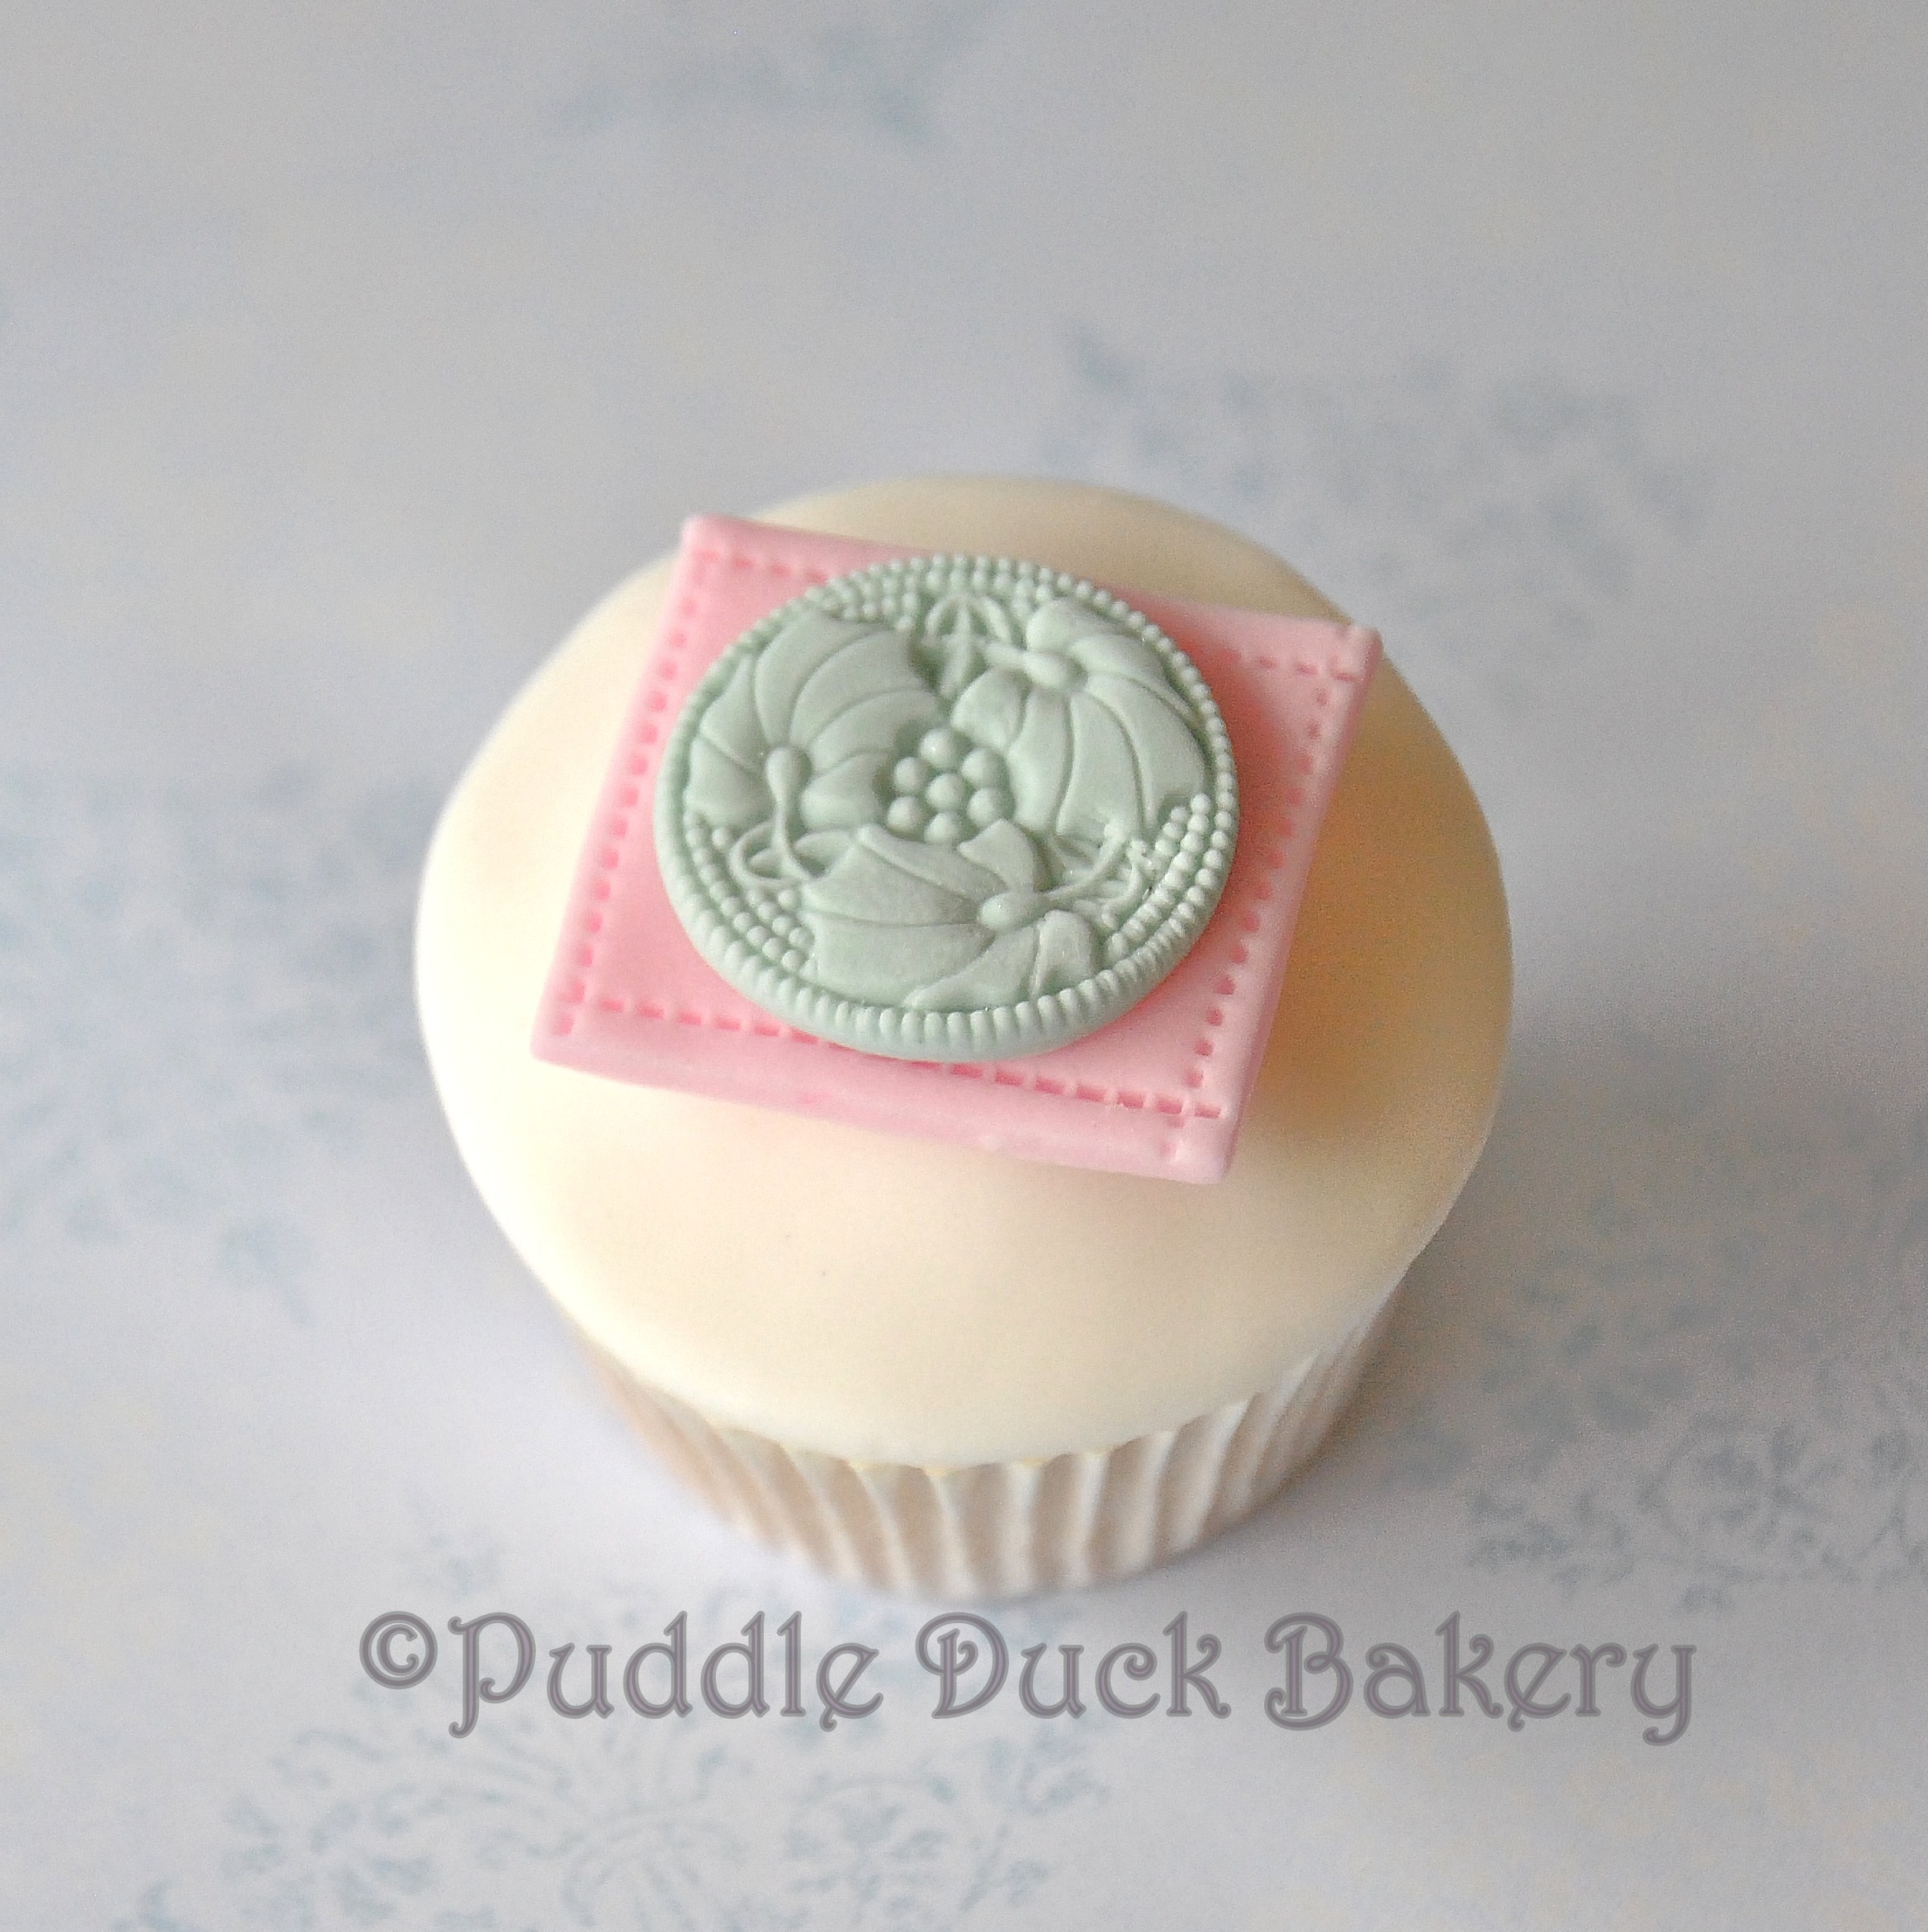 Using a stamp to decorate a button on a cupcake